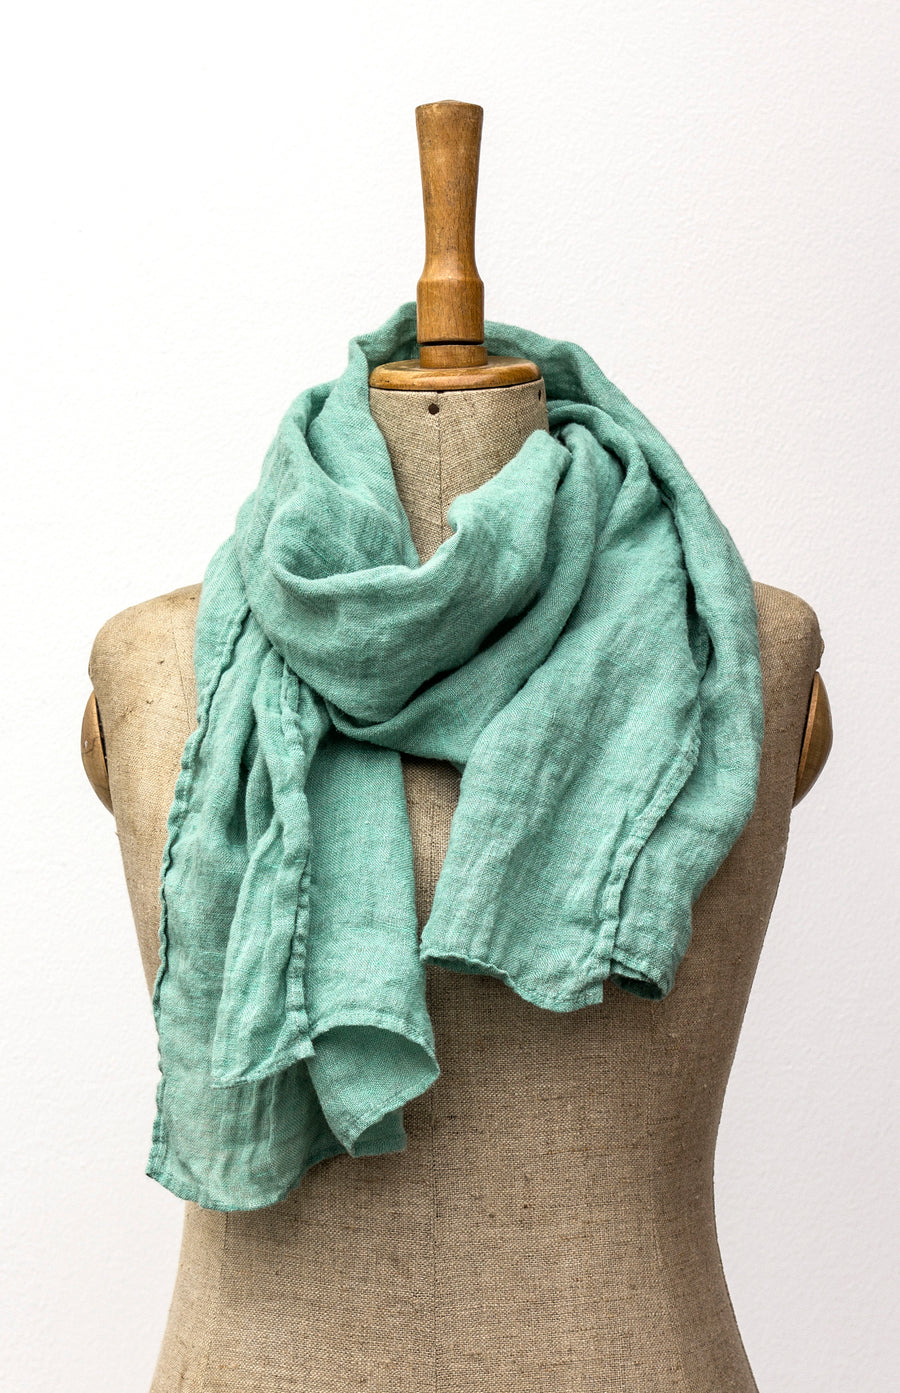 Luxuriously soft linen scarf in Creme de Menthe shade